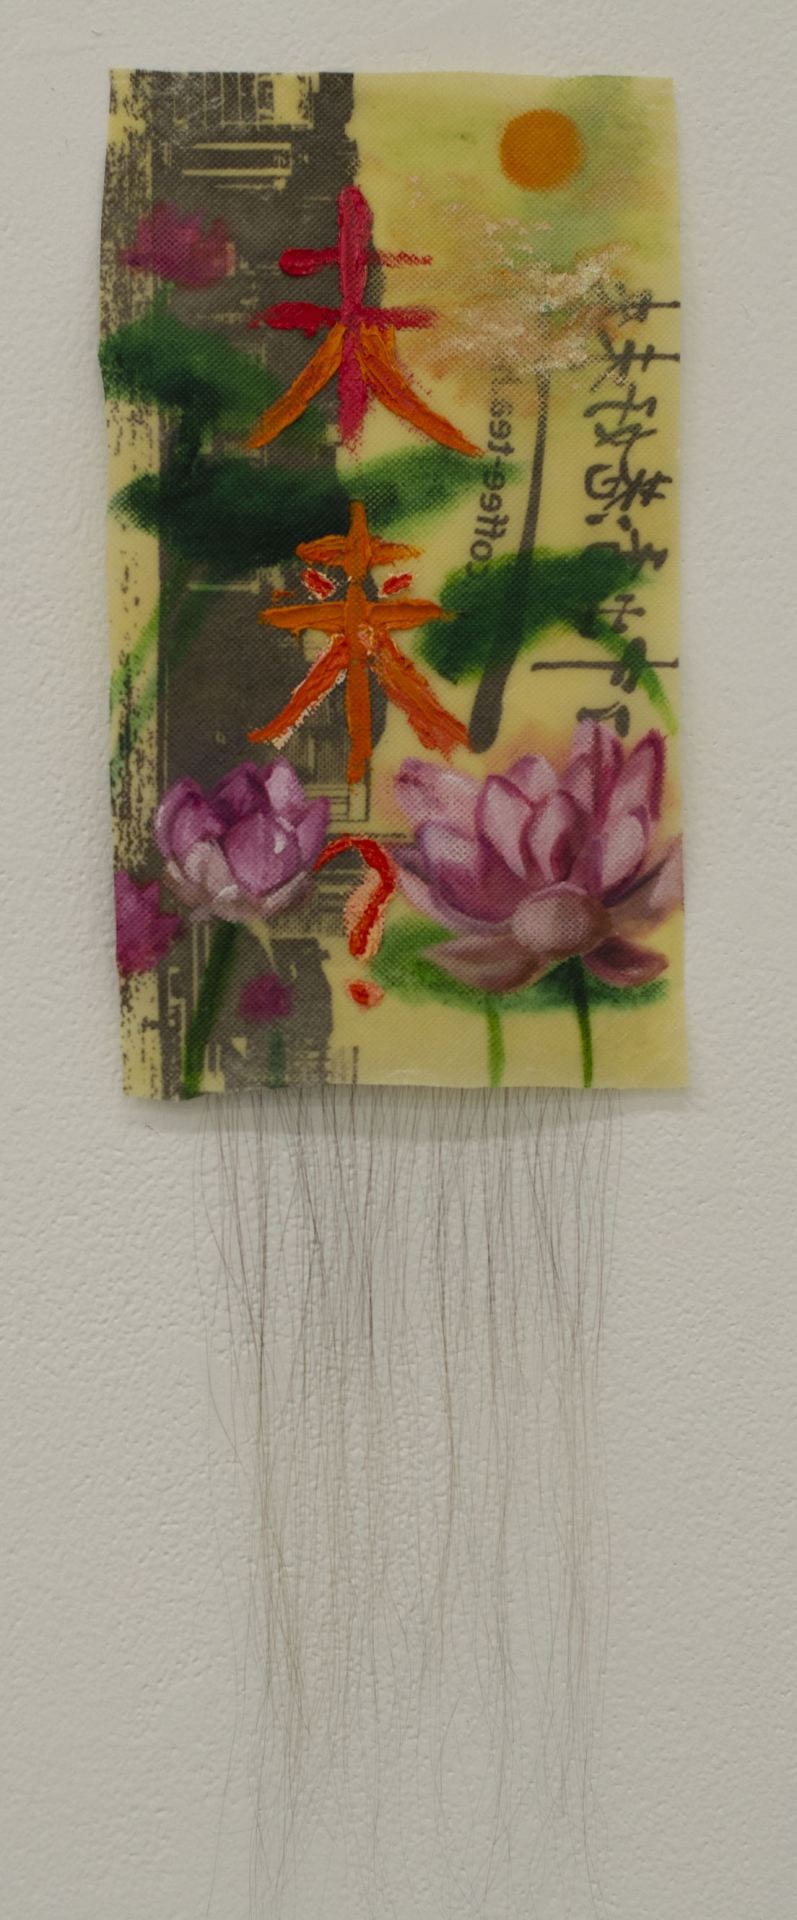 Painting. A rectangular fabric with lotus flowers, a sun, and the chinese words for 'future?' on it. Hair is attached to the bottom of the painting.